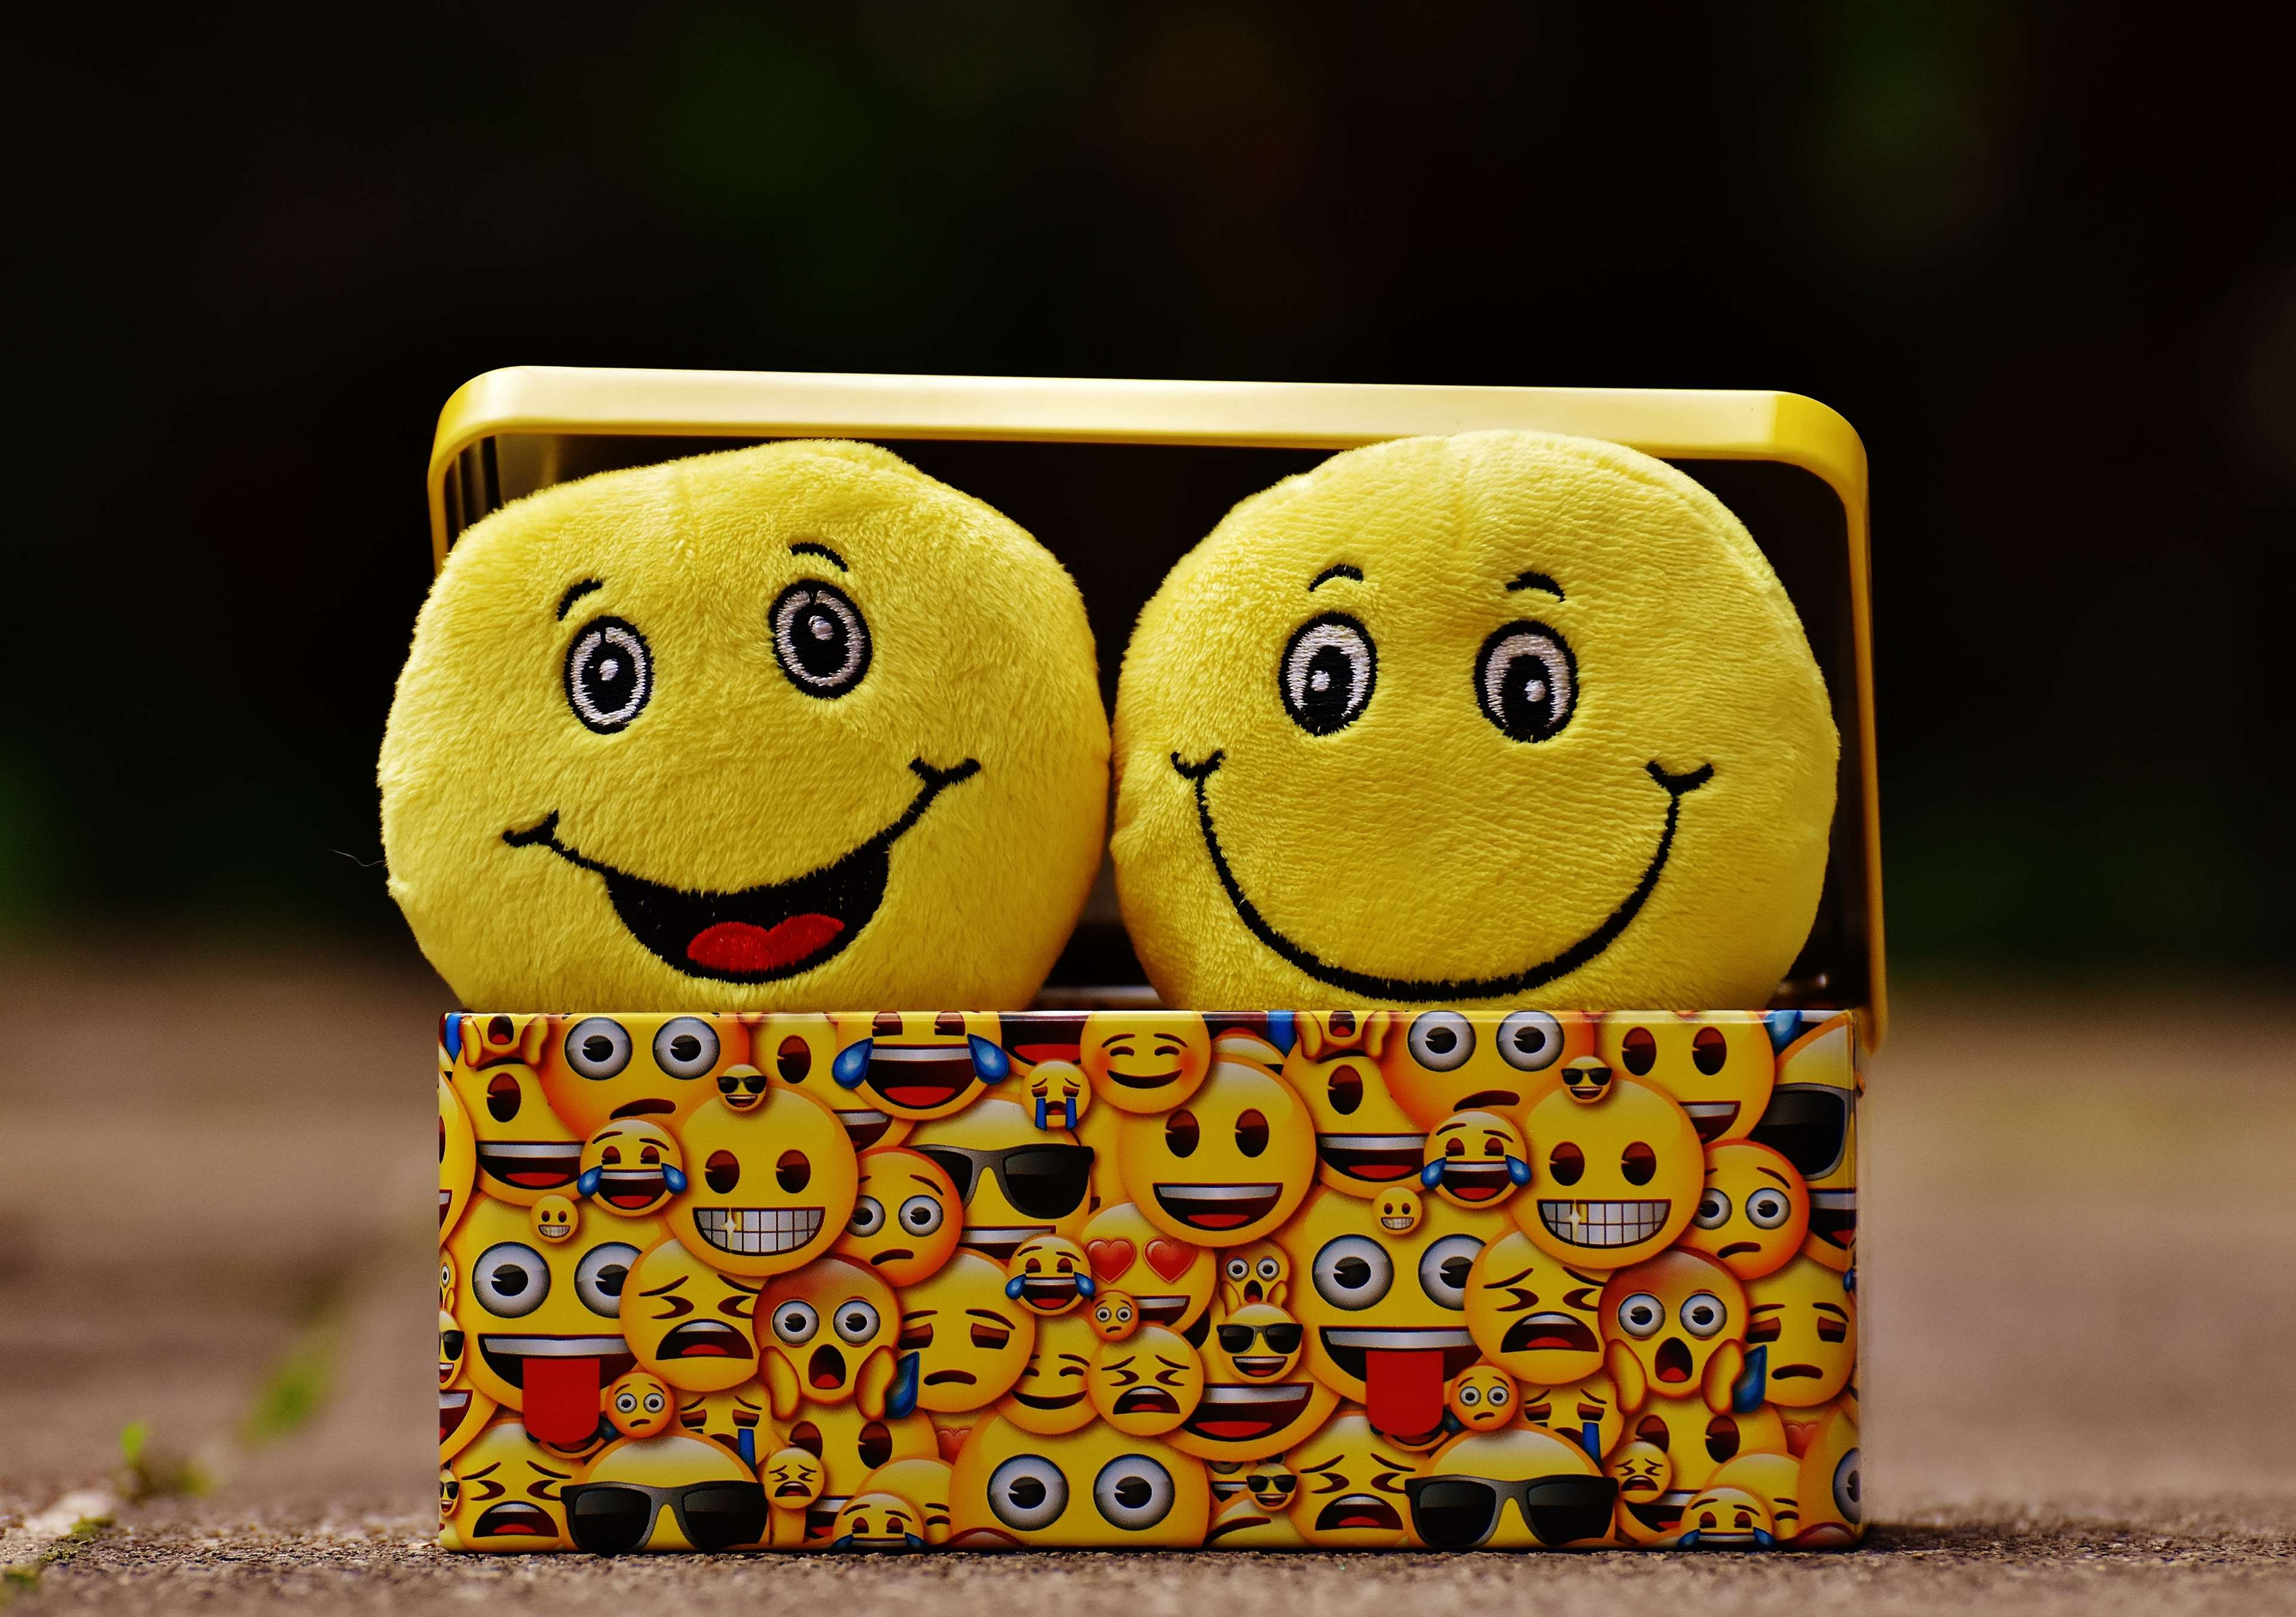 box, cheerful, color, cute, doll, emoji, emoticon, emotions, face, feeling, fun, funny, happiness, happy, joy, laugh, smile, smiley, toy, yellow 4k wallpaper